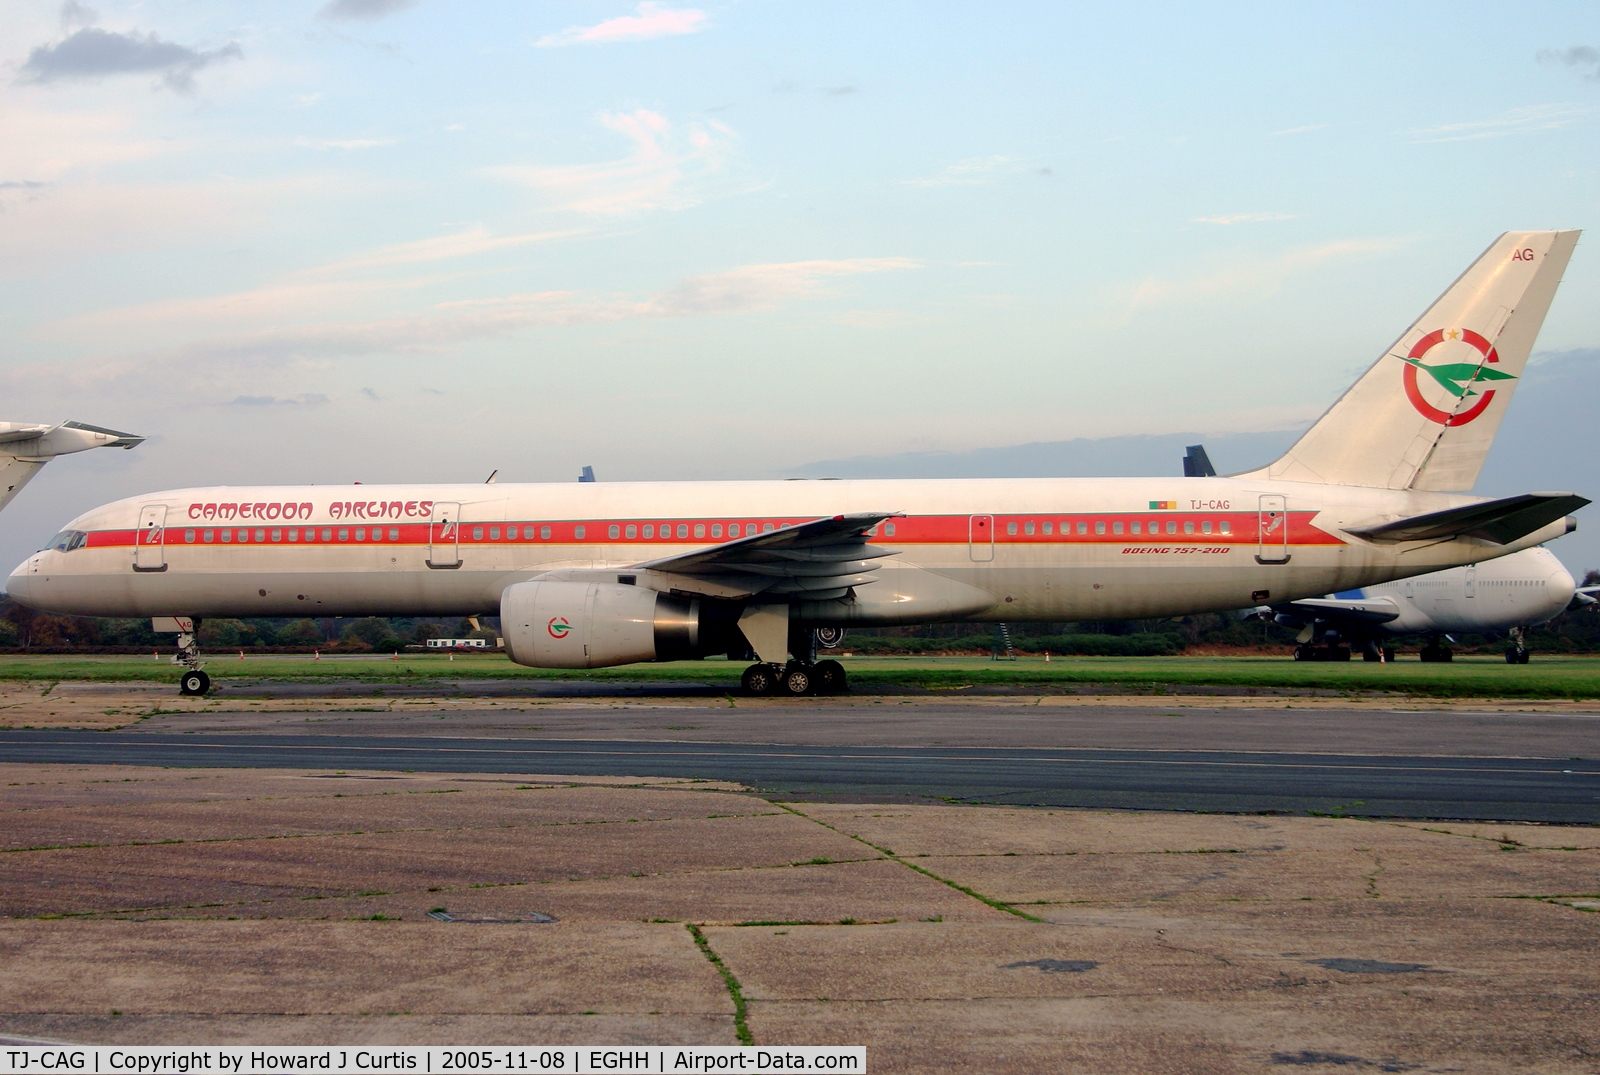 TJ-CAG, 1989 Boeing 757-23A C/N 24293, Cameroon Airlines. Here for work with BASCO.